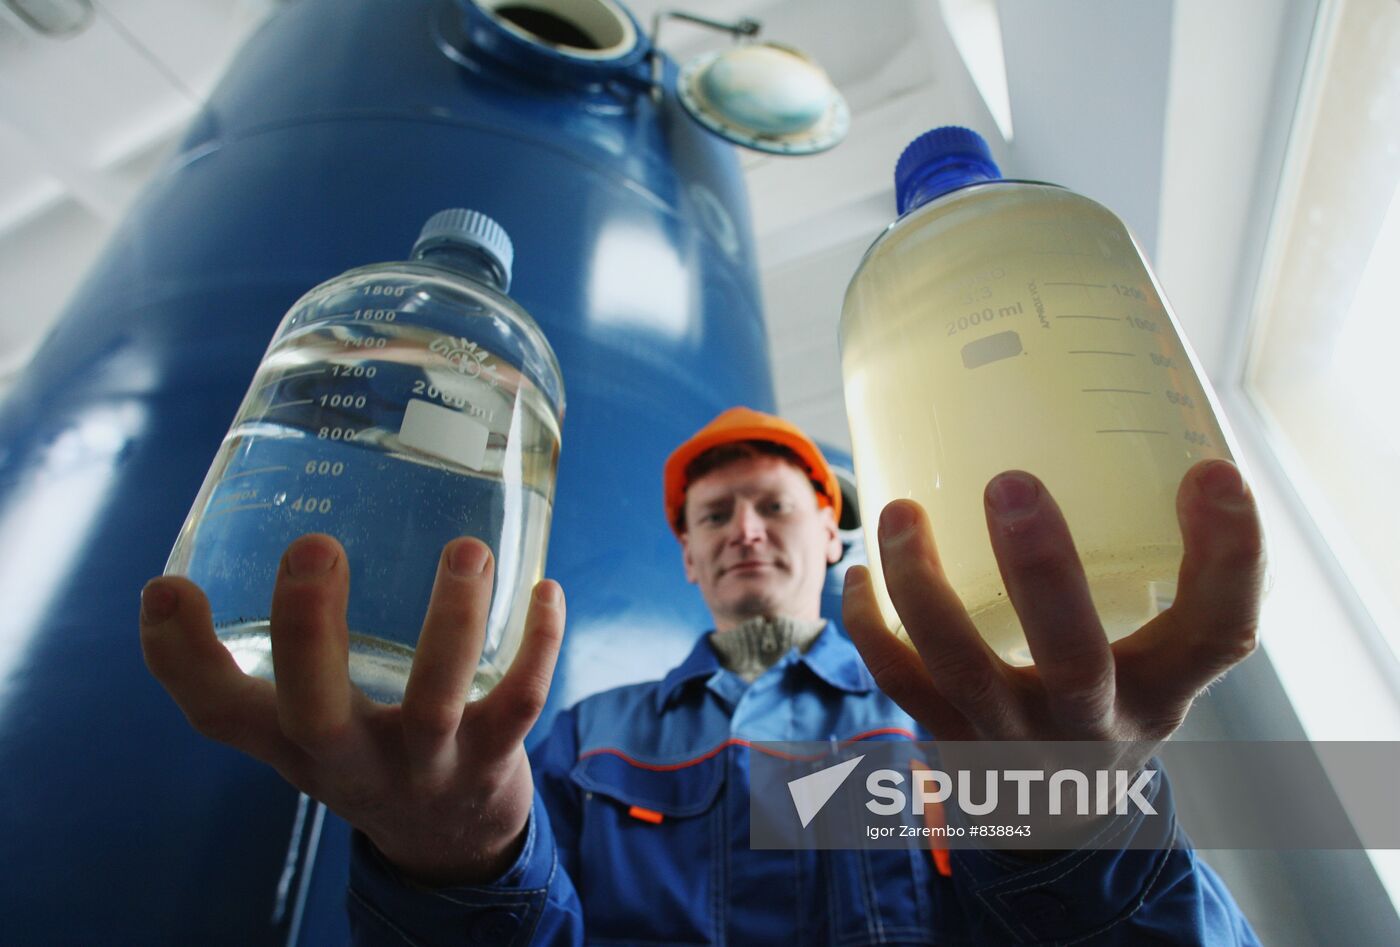 Commissioning water deferrization facility in Kaliningrad suburb